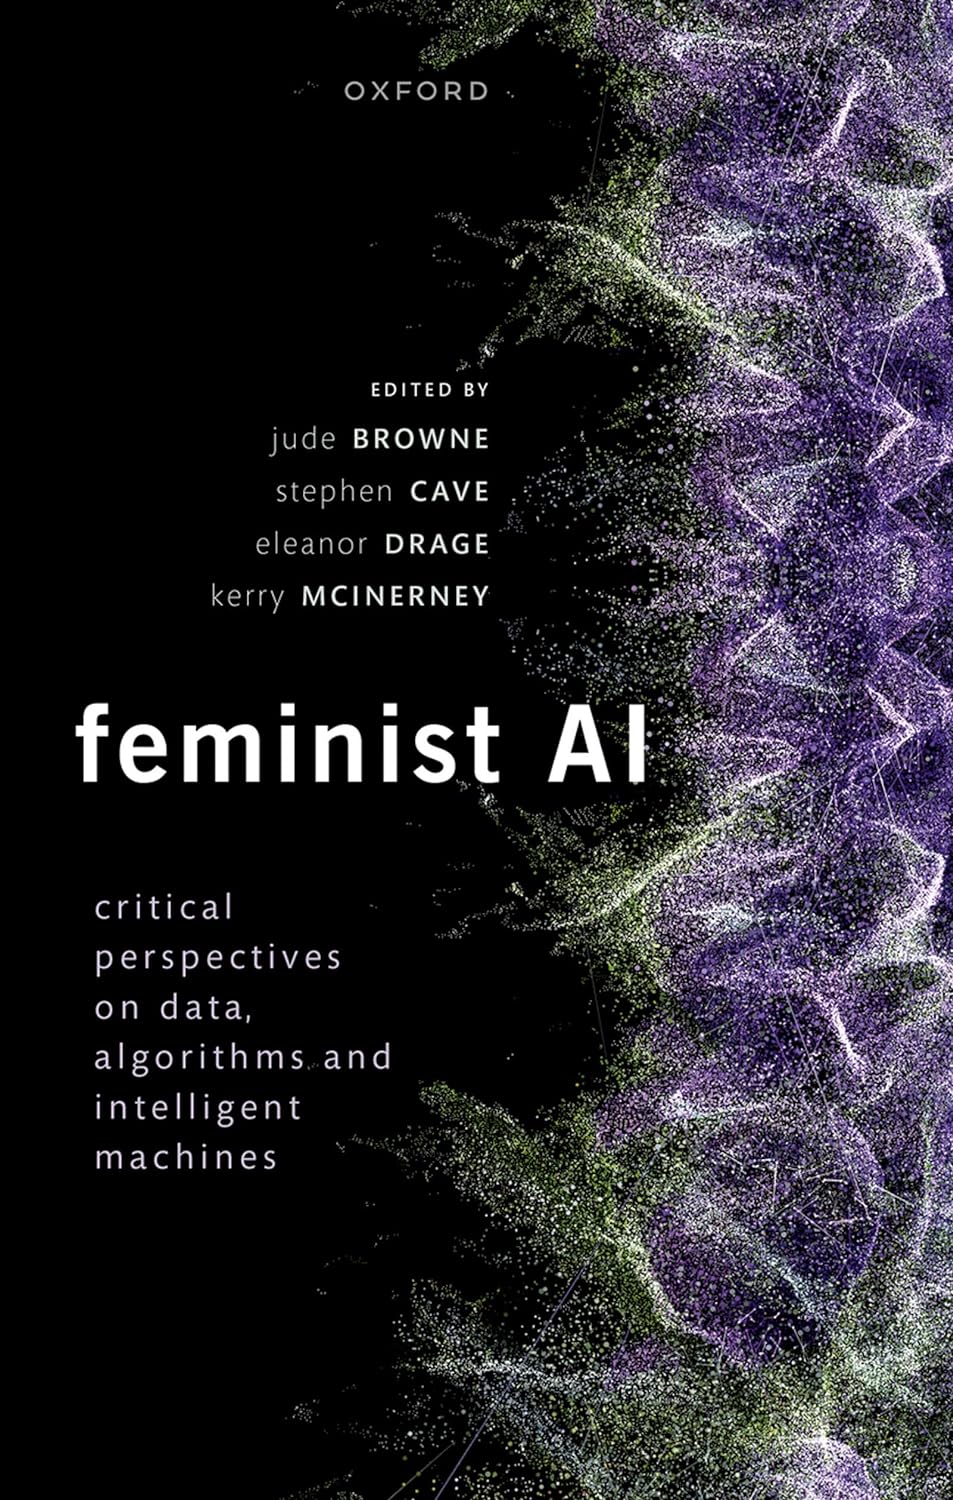 (EBook PDF)Feminist AI: Critical Perspectives on Algorithms, Data, and Intelligent Machines by Jude Browne, Stephen Cave, Eleanor Drage, Kerry McInerney